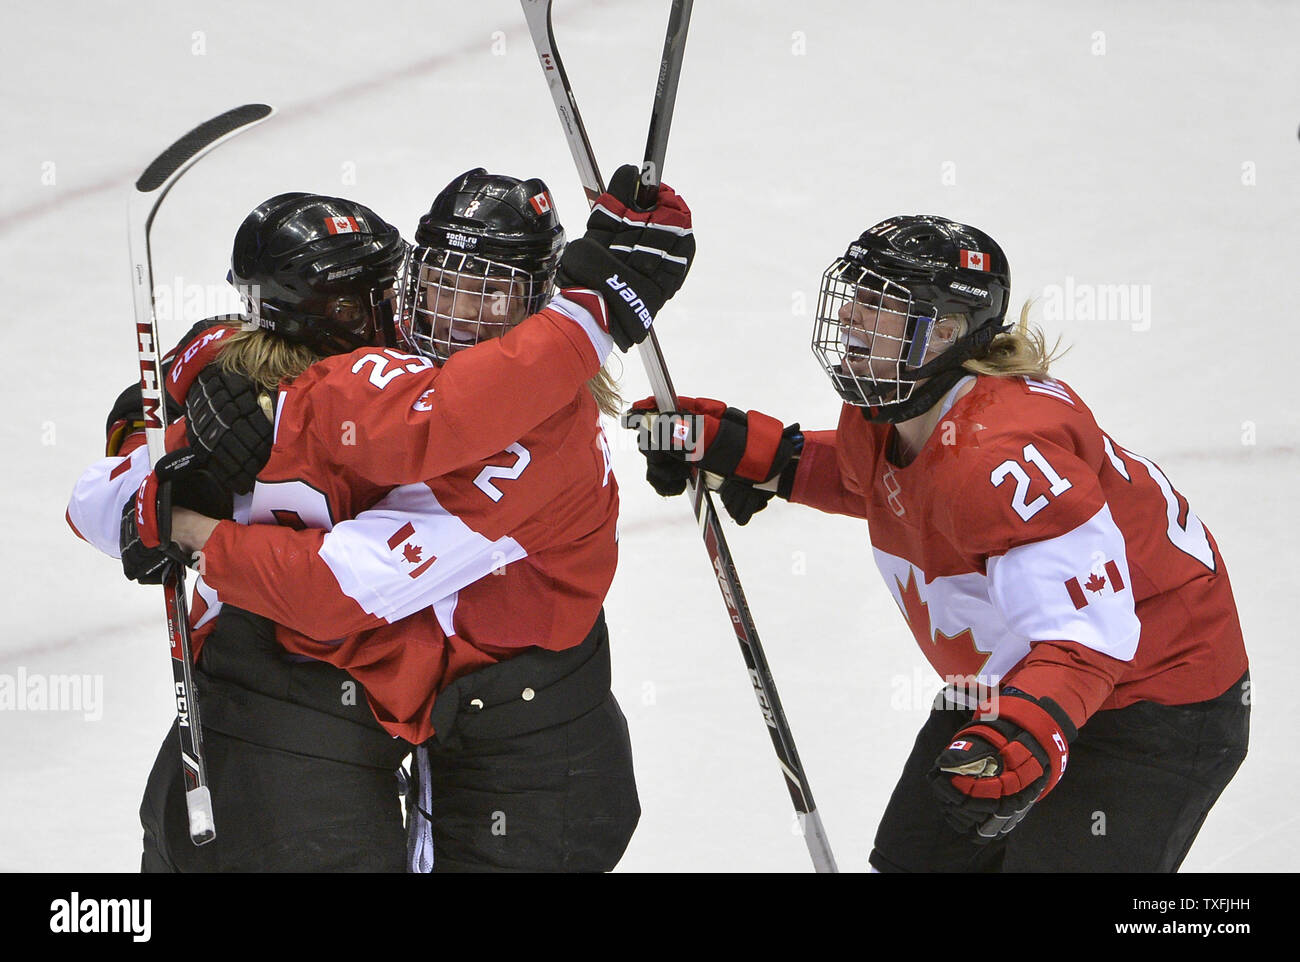 Canada's Marie-Philip Poulin (L-R), Meghan Agosta and Haley Irwin celebrate Poulin's goal during the third period of the women's gold medal ice hockey game against the United States at the Sochi 2014 Winter Olympics on February 20, 2014 in Sochi, Russia.     UPI/Brian Kersey Stock Photo